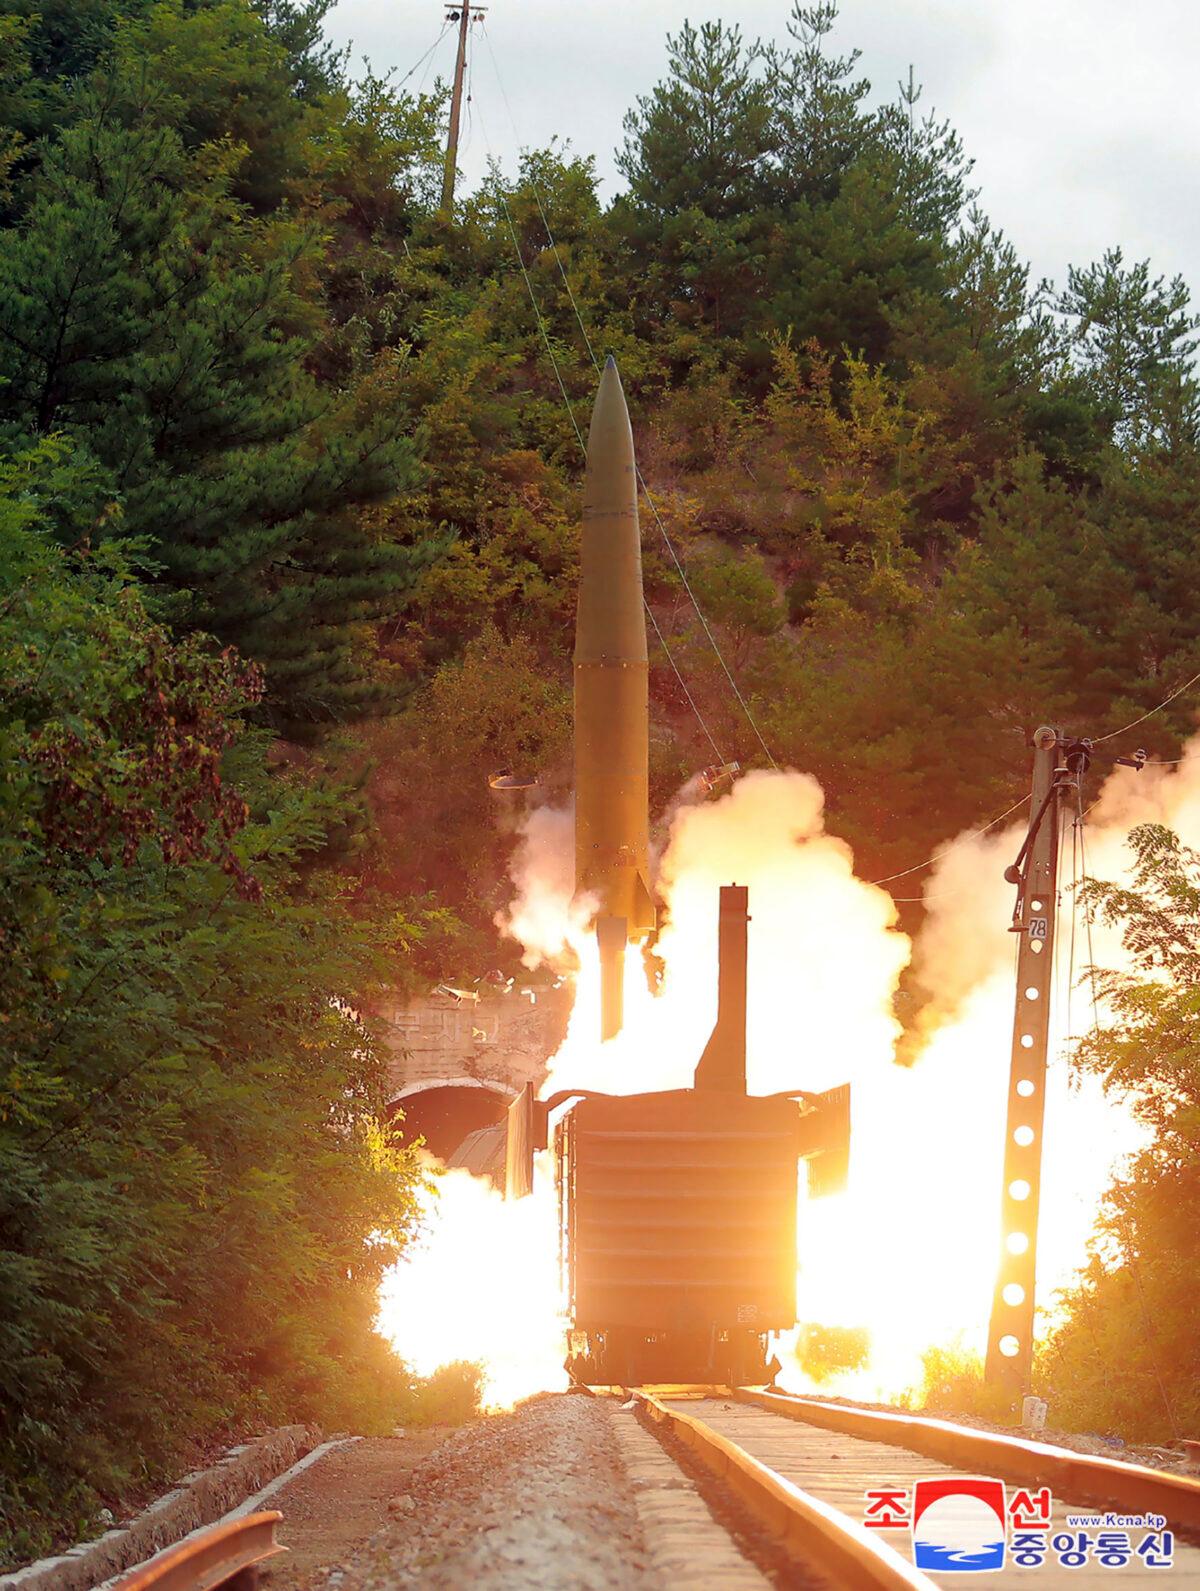 This photo provided by the North Korean government on Sept. 16, 2021, shows a test missile launched from a train in an undisclosed location of North Korea, on Sept. 15, 2021. (Korean Central News Agency/Korea News Service via AP)